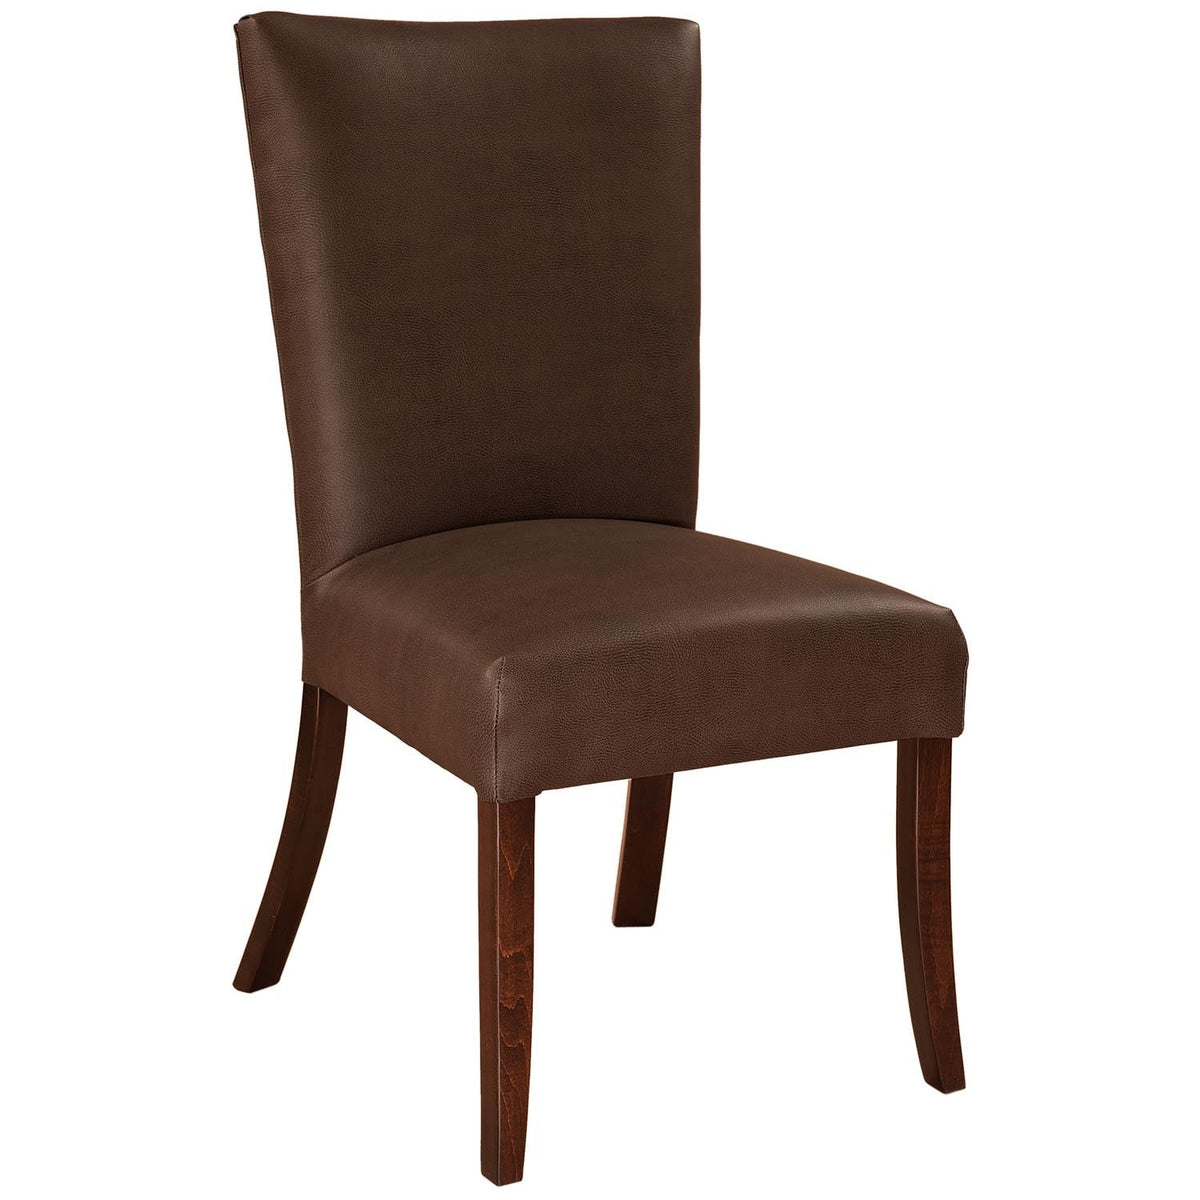 Venice Chair - snyders.furniture